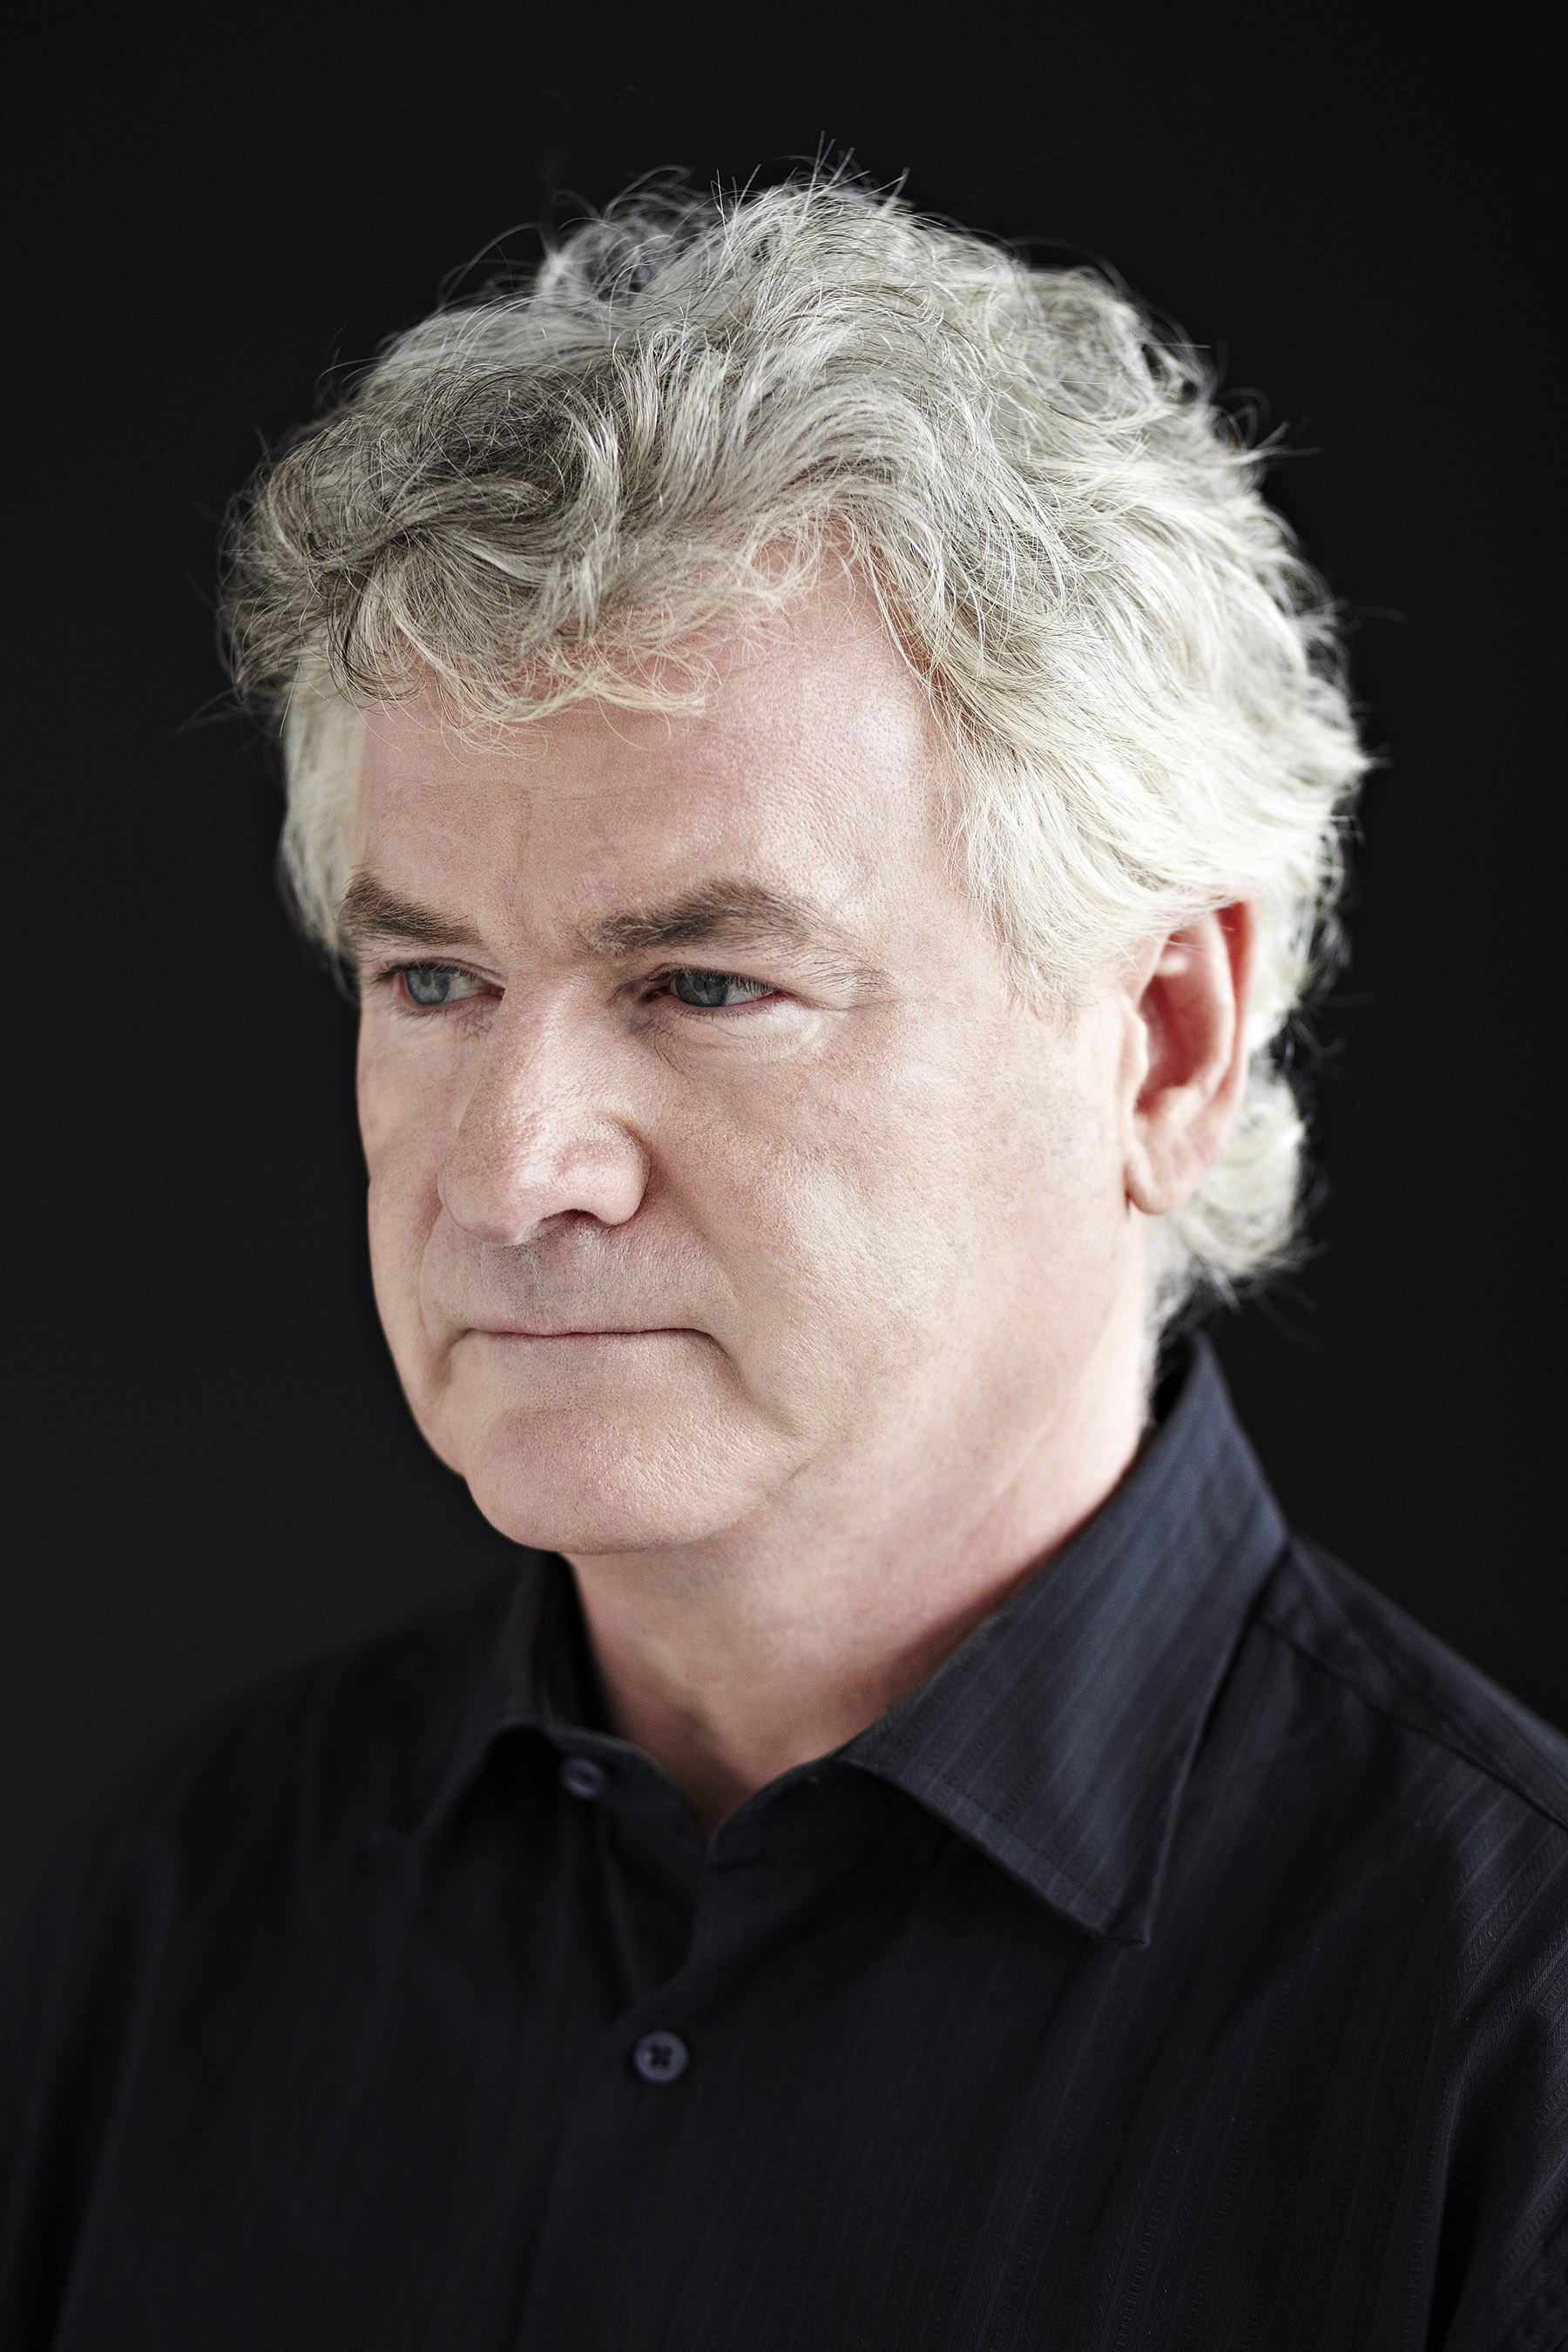 MEMORY LANE - Singer John McDermott will be performing memorable favourites during a City stop May 27th at the Memorial Centre.